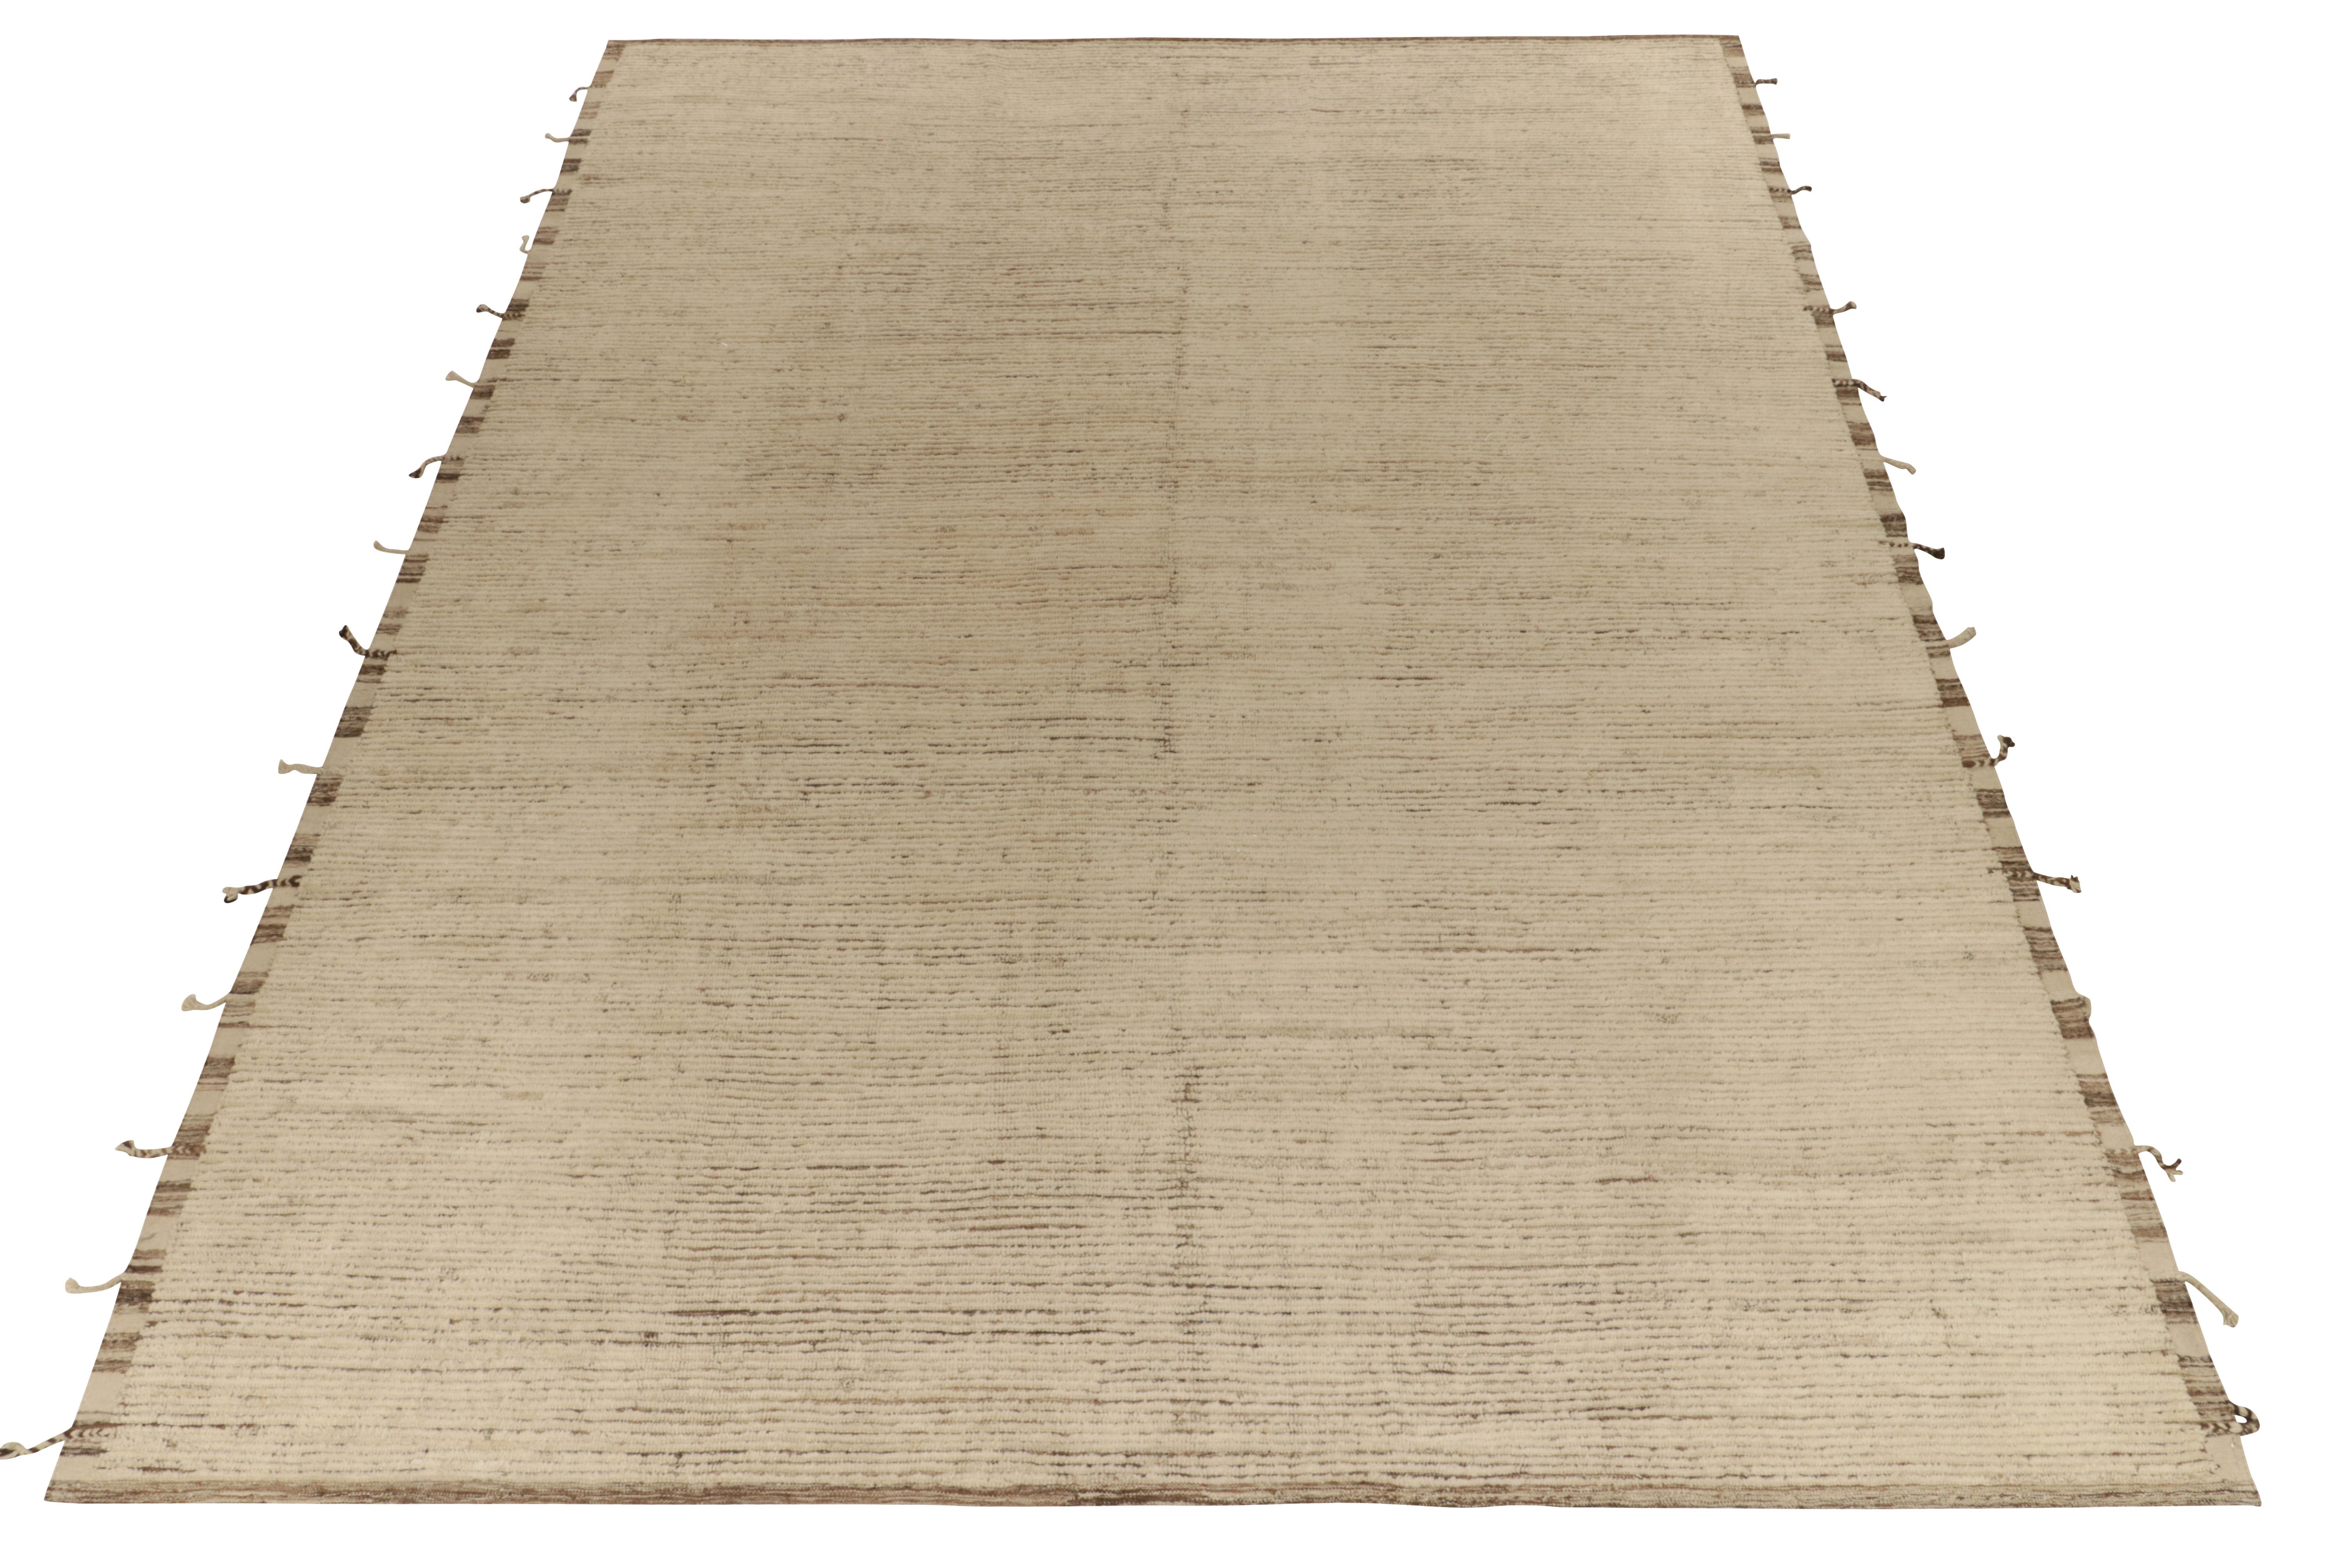 Rug & Kilim presents a contemporary take on Moroccan style with this 11x14 hand-knotted piece of sublime textural appeal. The rug enjoys a comfortable high low appeal in forgiving beige brown striations concluding to fringes on the borders for